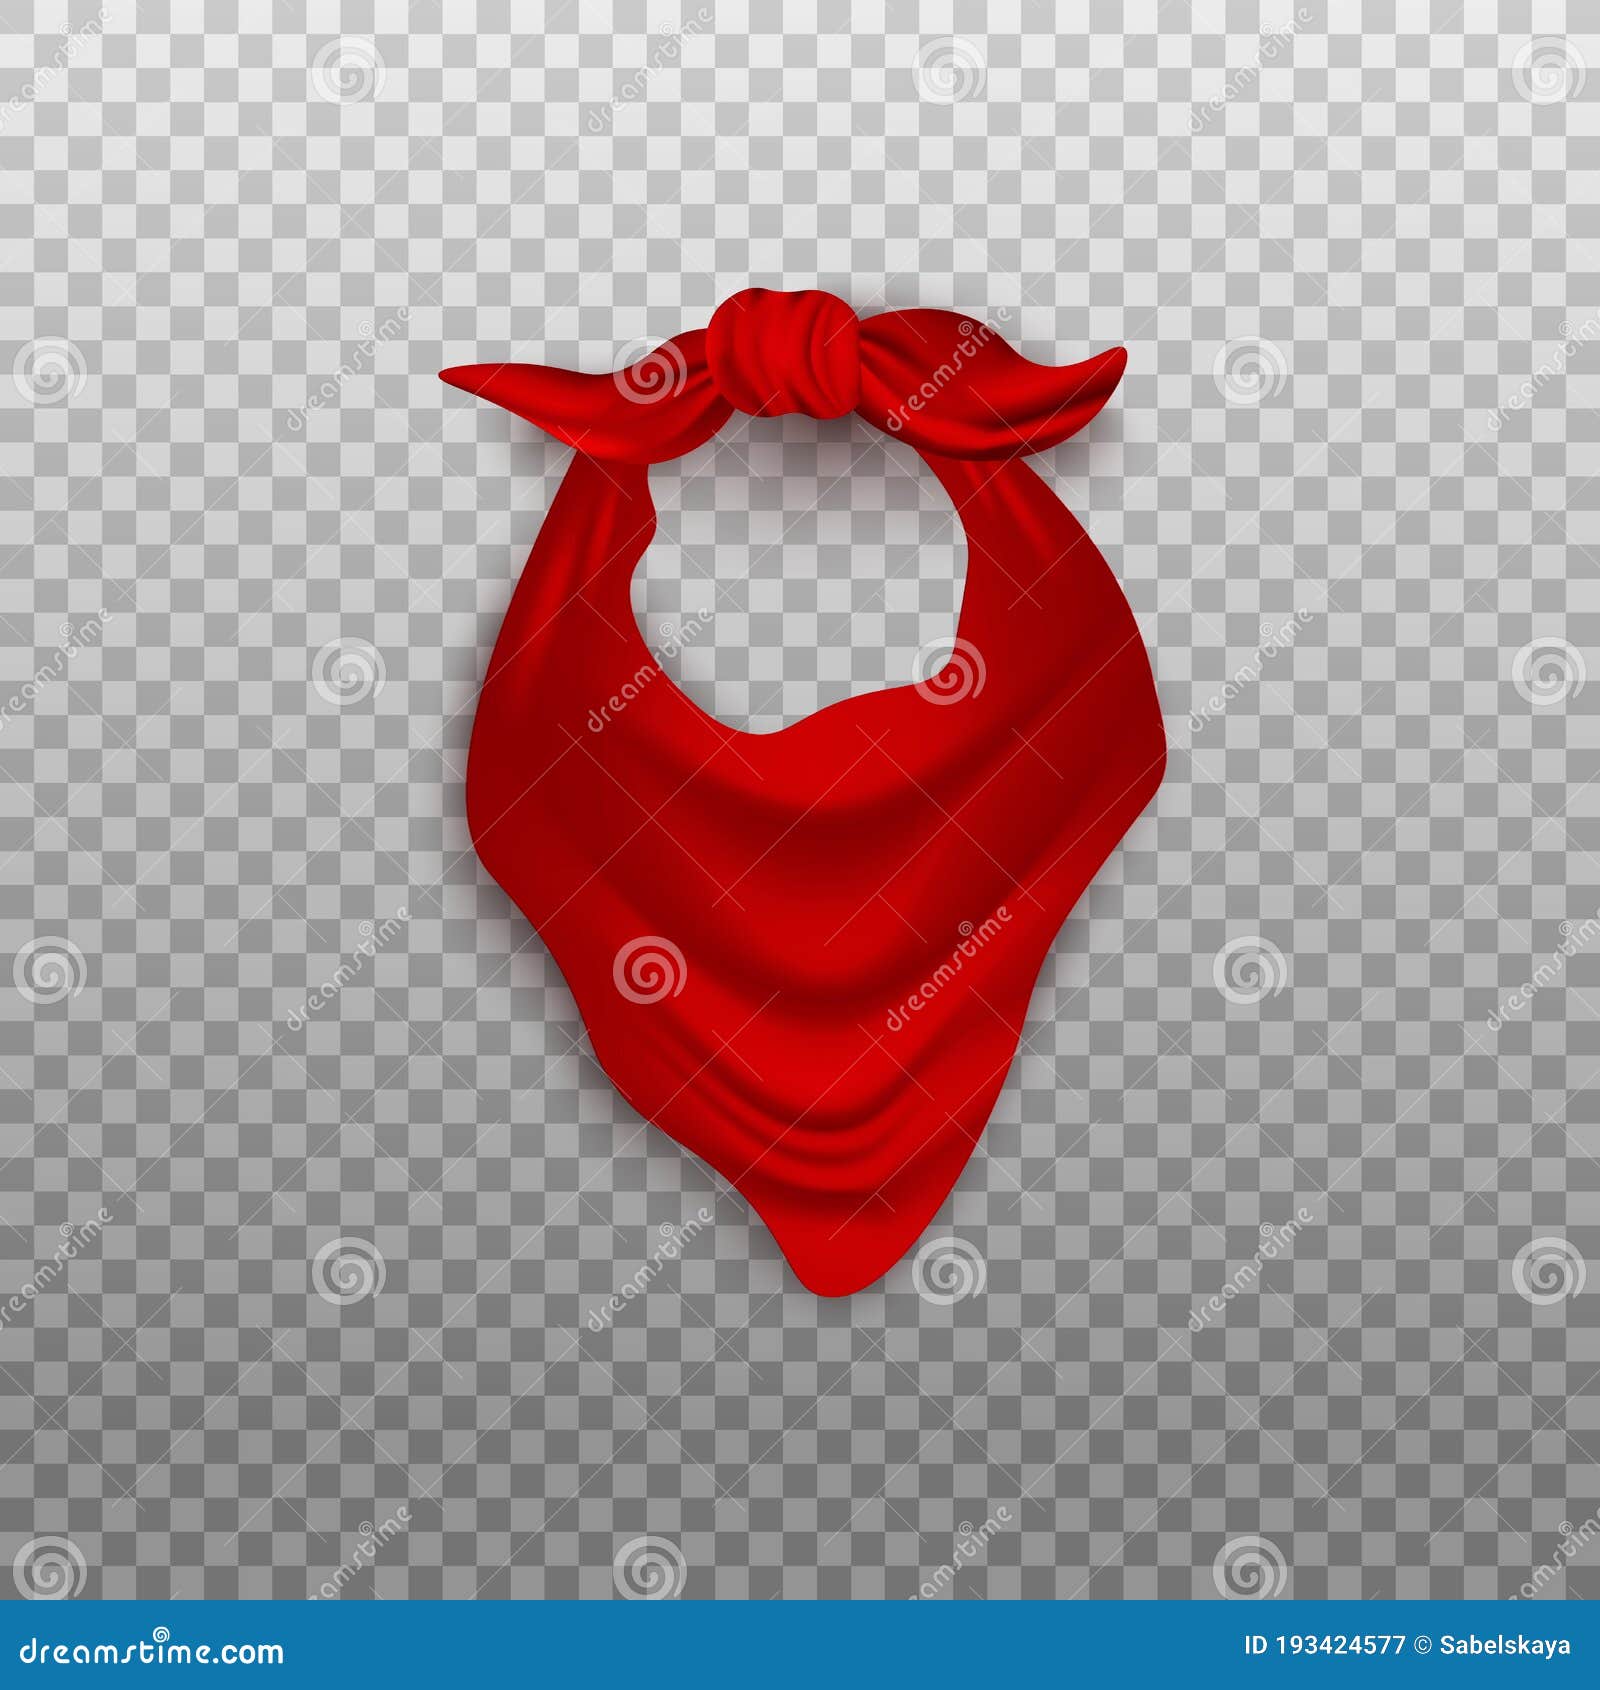 Download Red Blank Bandana Or Neck Scarf Realistic Vector Mockup ...